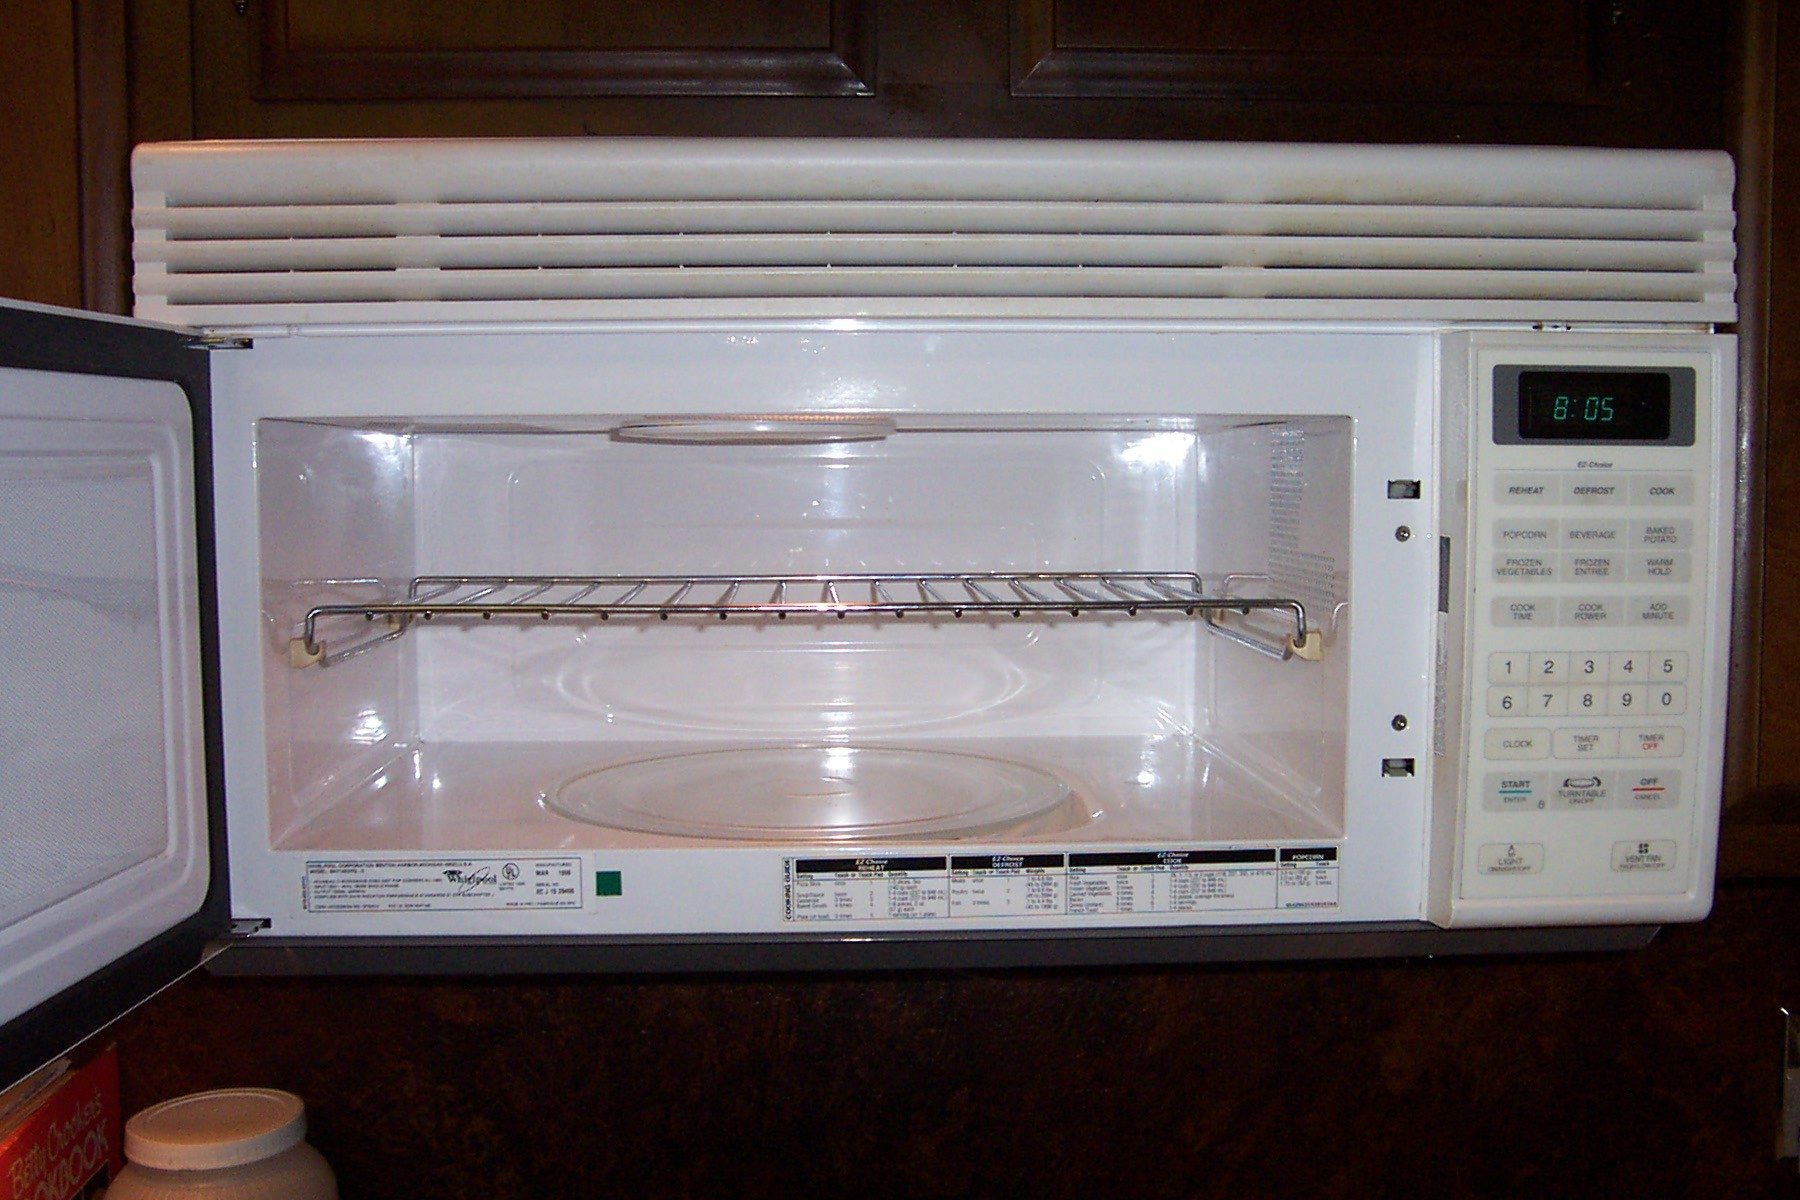 Convection Oven Vs Microwave – Chooserly